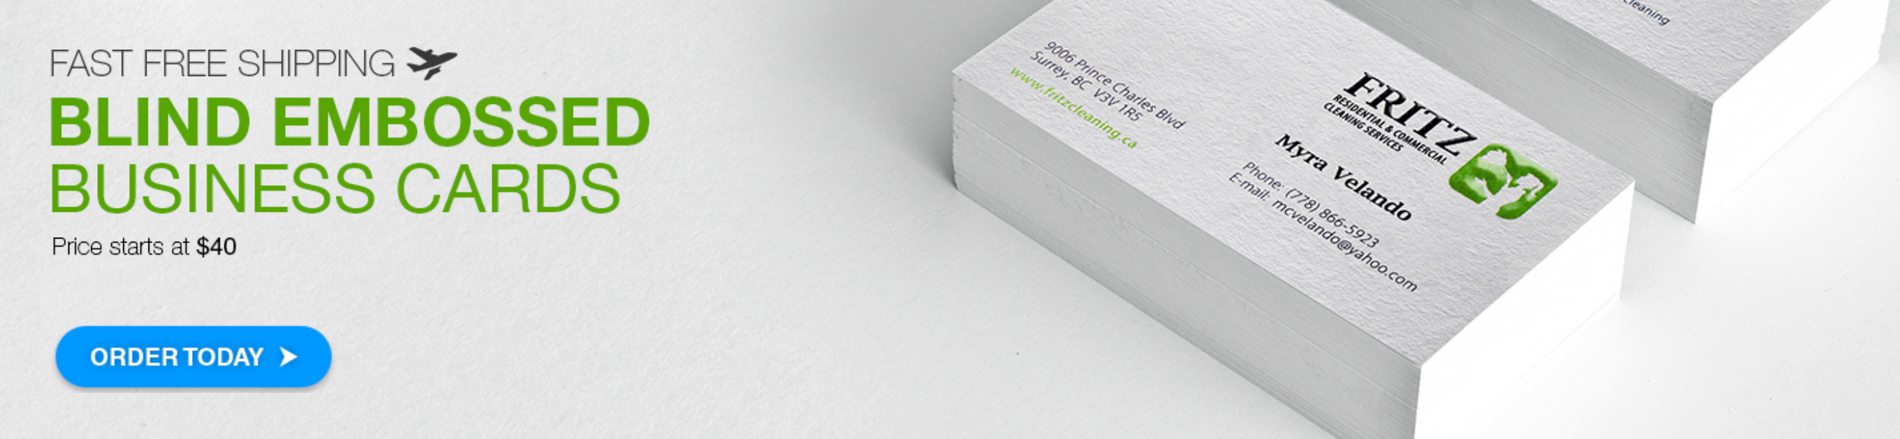 Blind Embossed Business Card by Aladdin Print